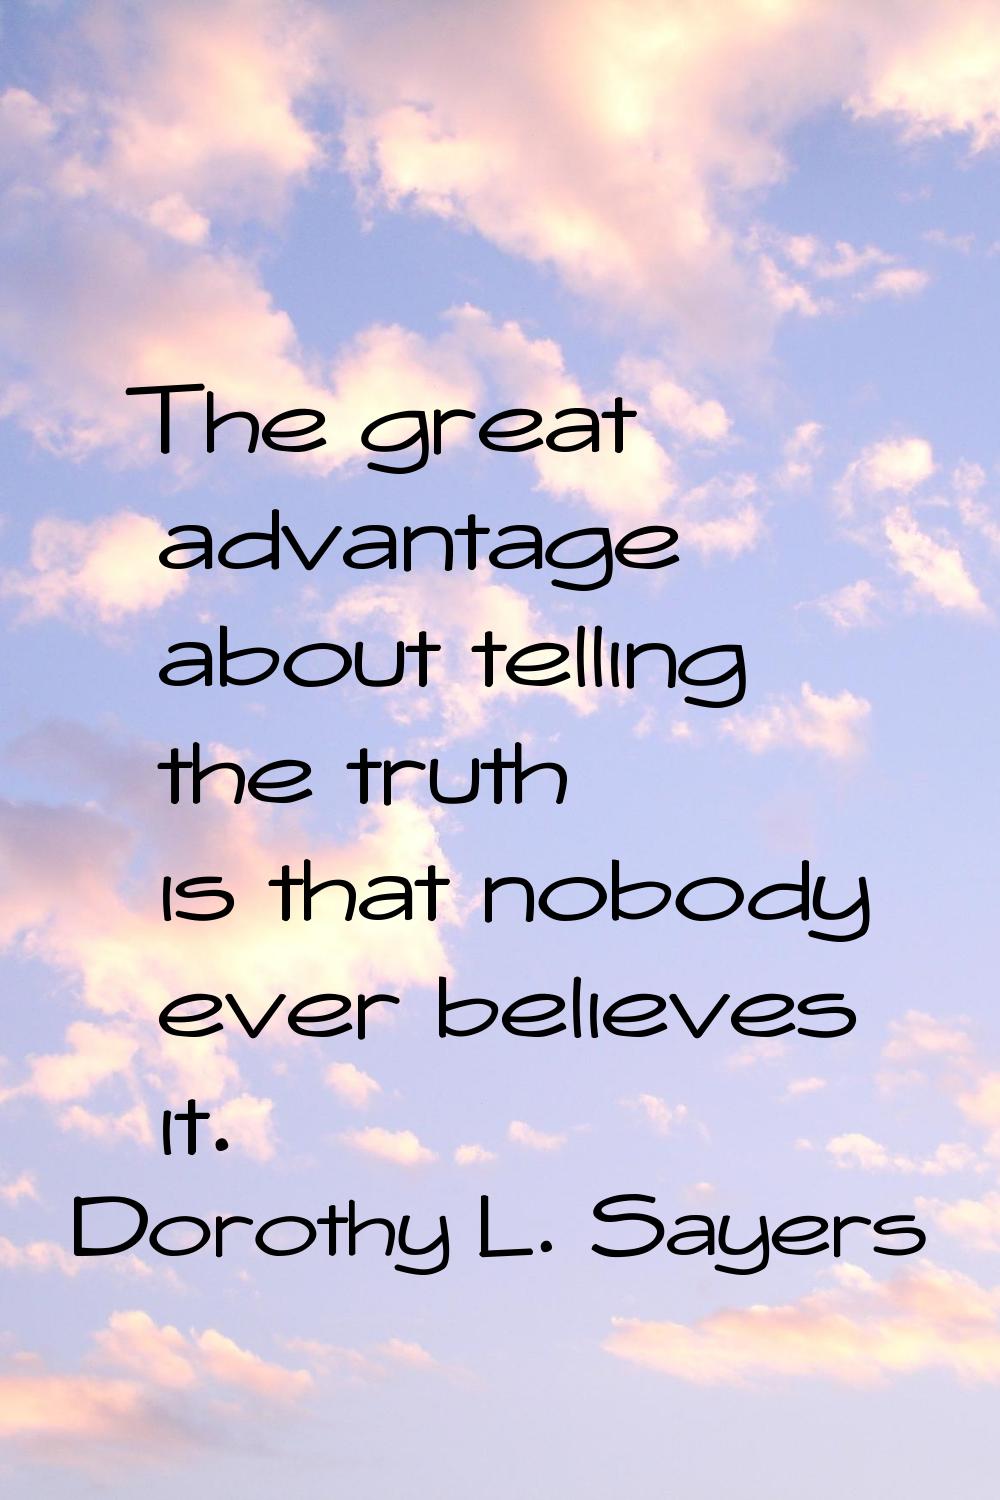 The great advantage about telling the truth is that nobody ever believes it.